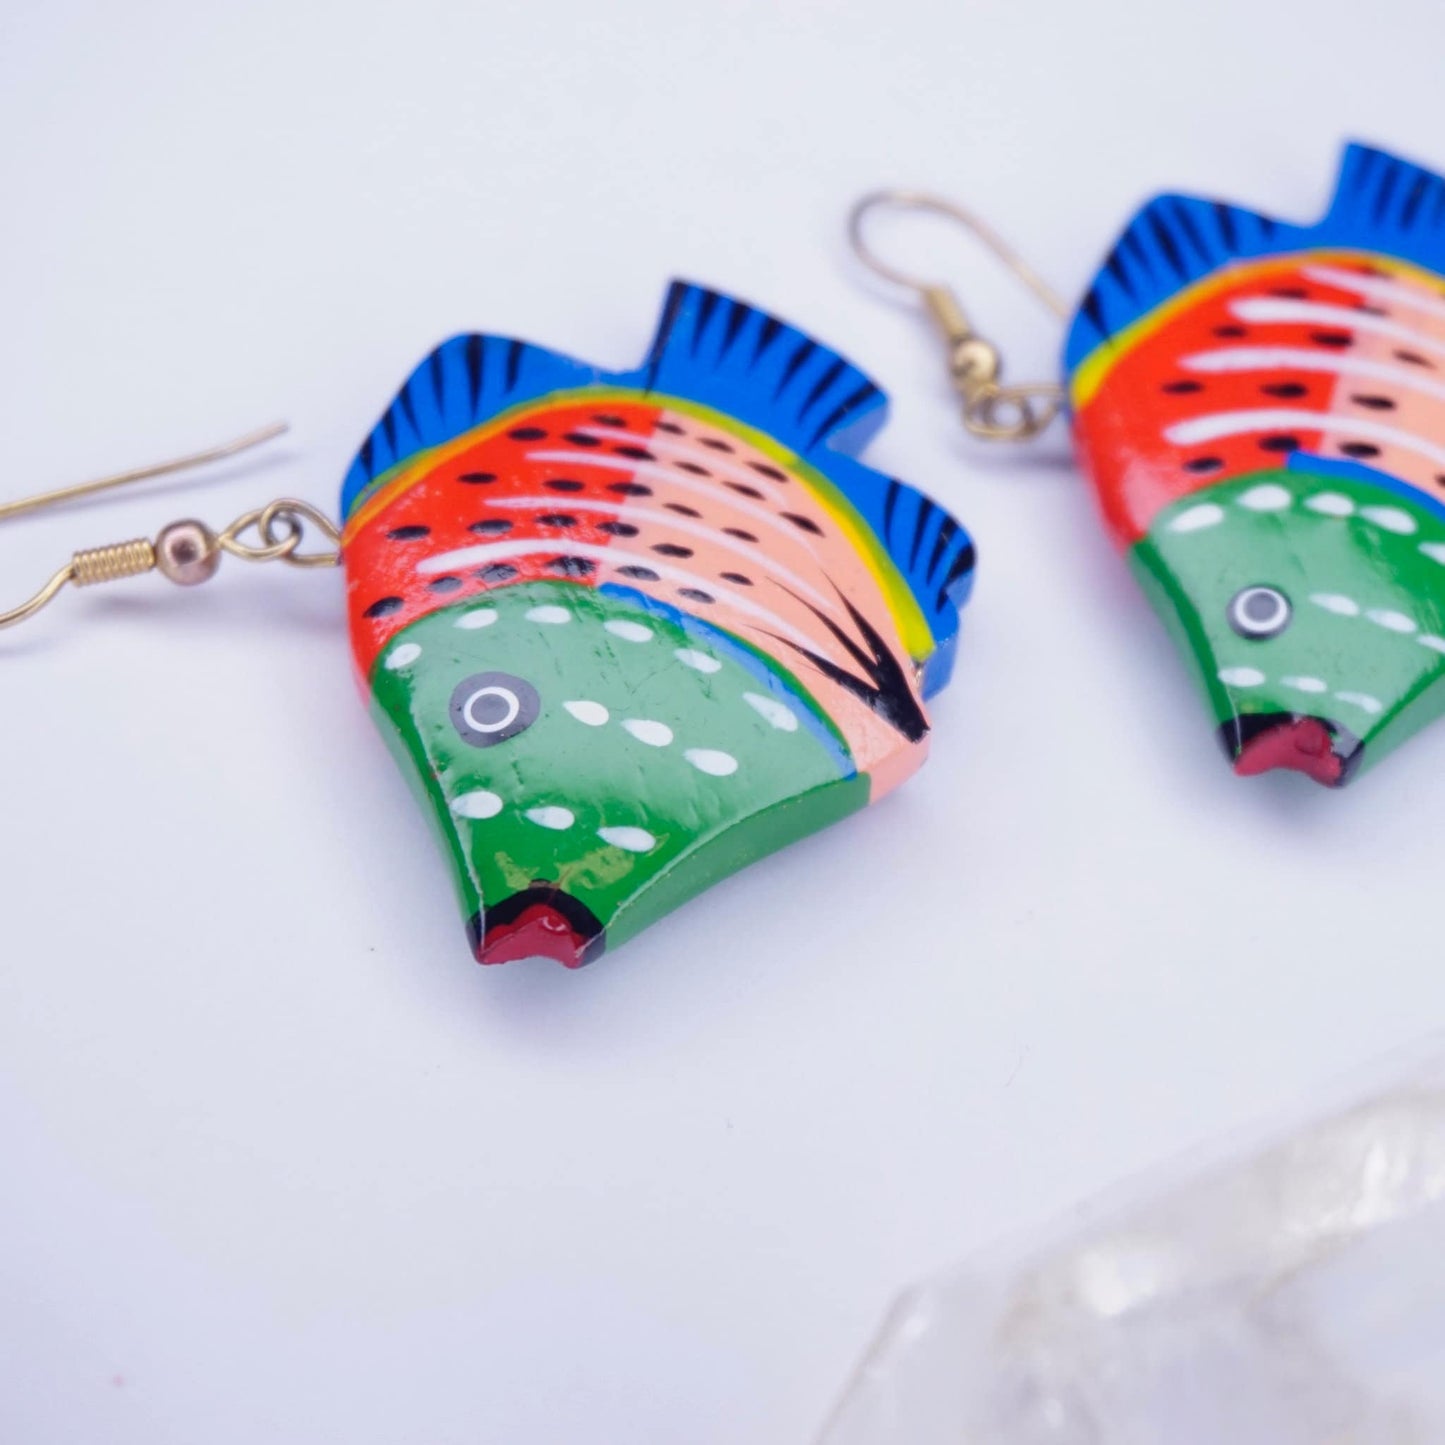 Handmade vintage wooden fish earrings with colorful painted design on white background